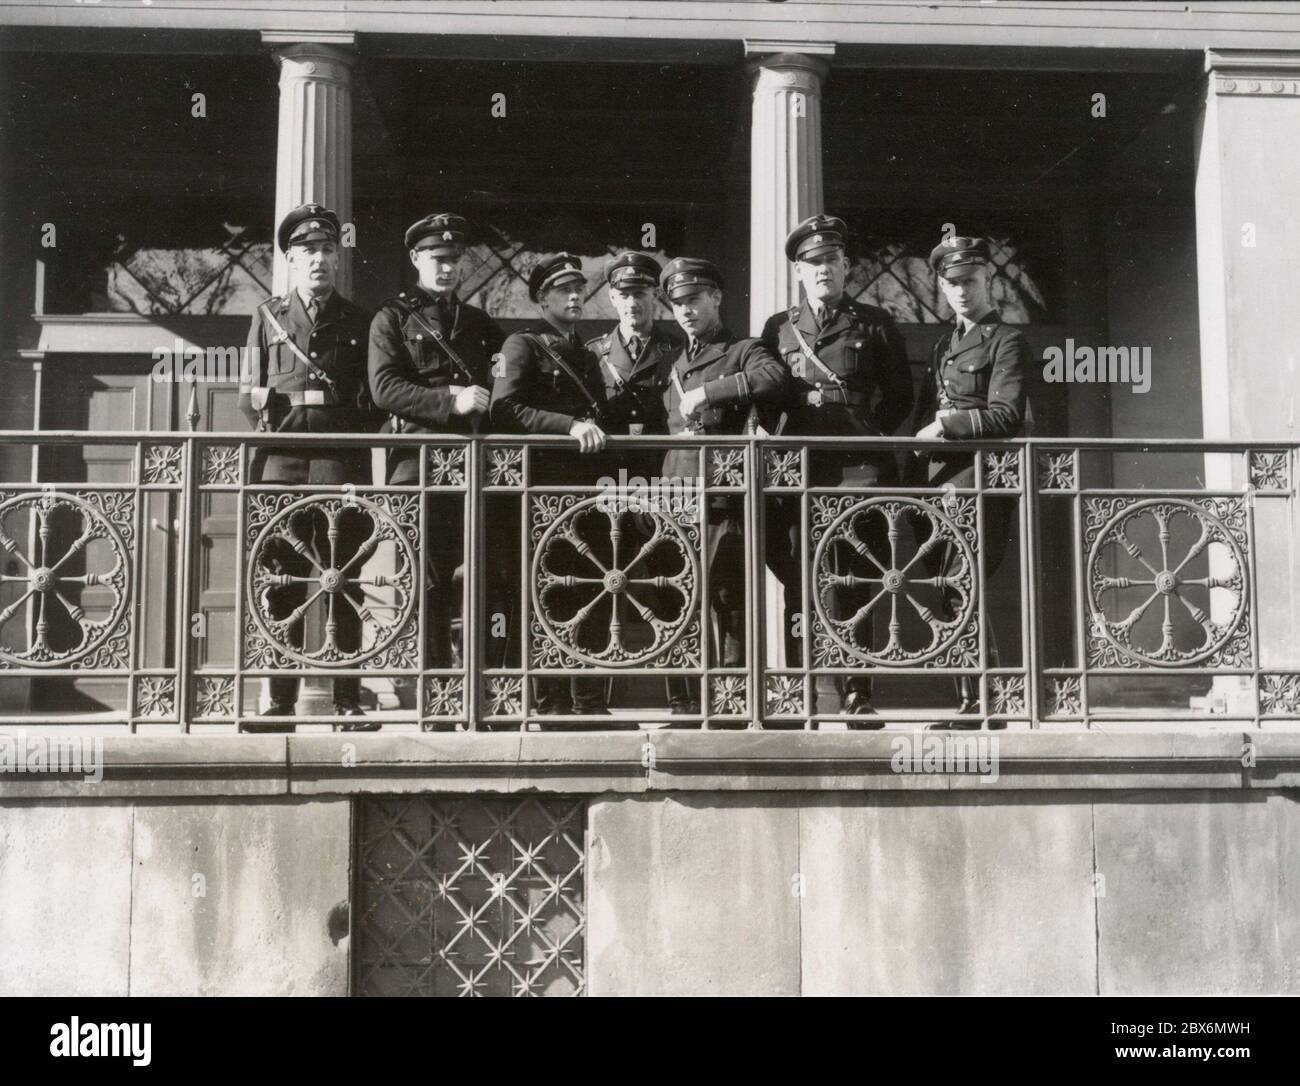 SS guards in the Ministry of Propaganda. Heinrich Hoffmann Photographs 1933 Adolf Hitler's official photographer, and a Nazi politician and publisher, who was a member of Hitler's intimate circle. Stock Photo